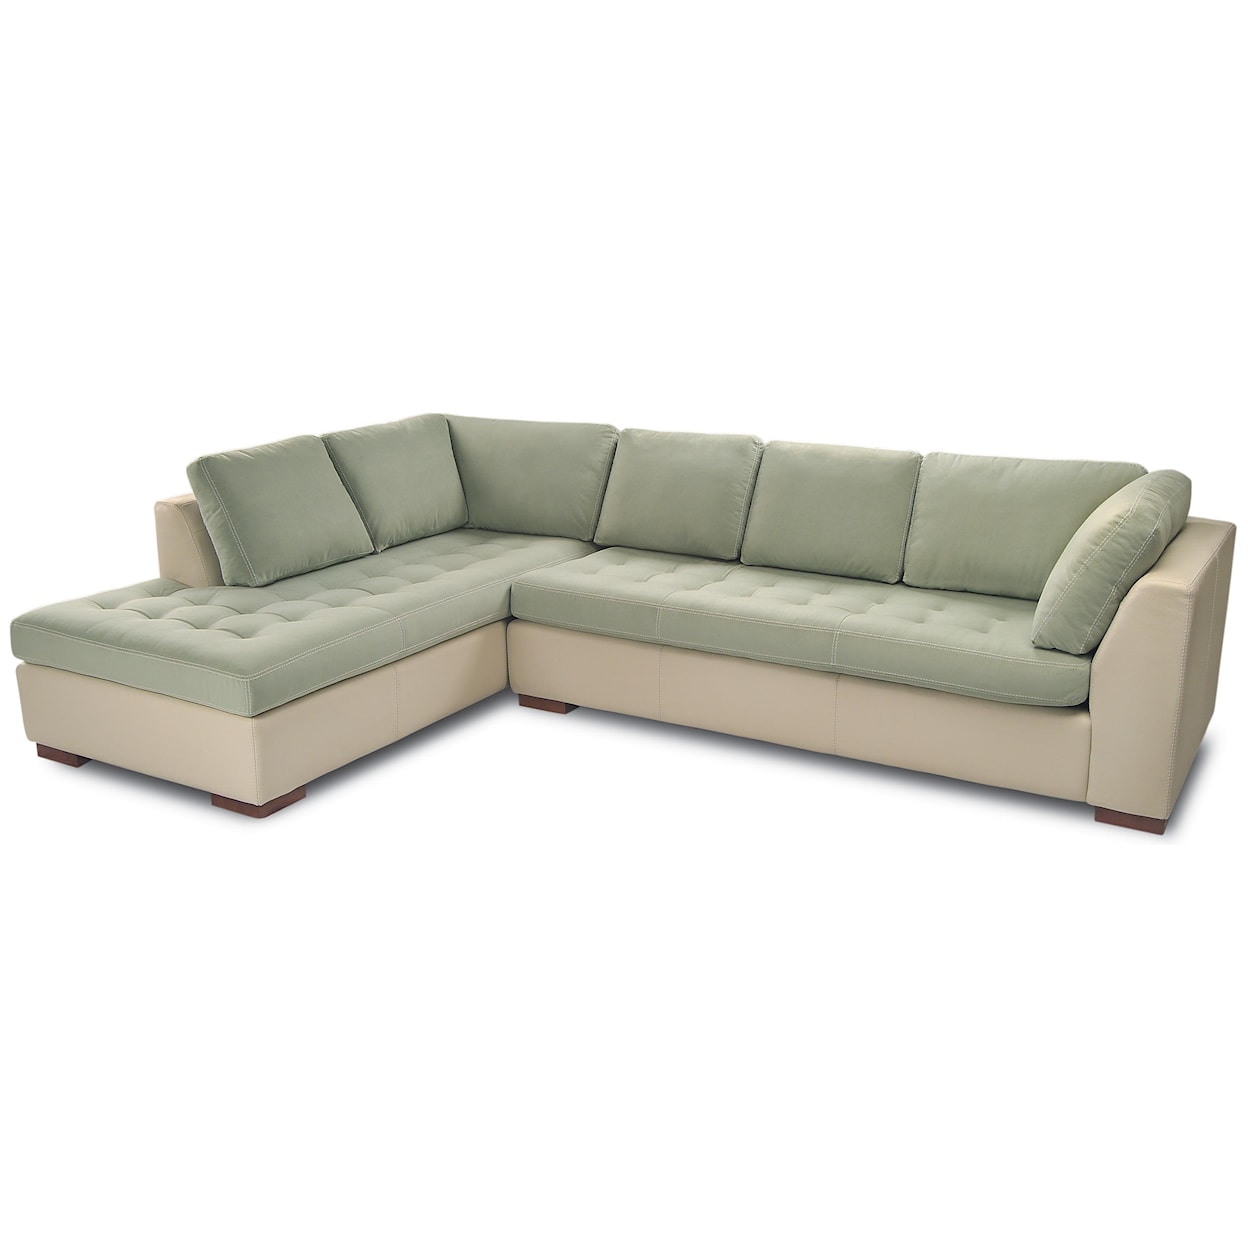 American Leather Astoria Sectional Sofa